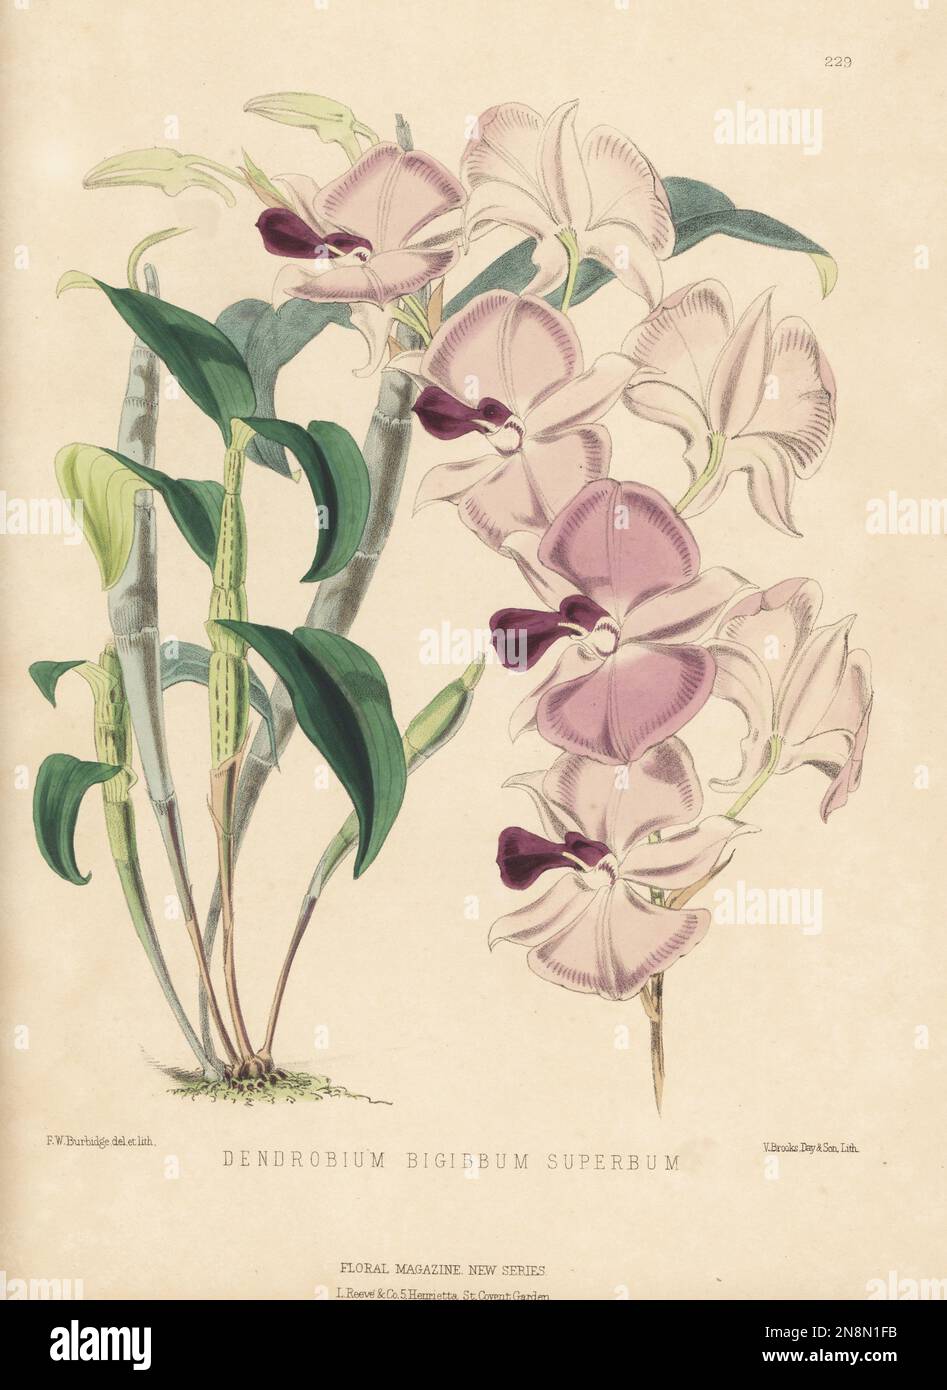 Cooktown orchid, Dendrobium bigibbum var. superbum, vulnerable. Native to Queensland, Australia, discovered by Dr Thomson on Mounth Adolphus, Torres Straits. As double-spurred dendrobe, Dendrobium bigibbum superbum. Handcolored botanical illustration drawn and lithographed by Frederick William Burbidge from Henry Honywood Dombrain's Floral Magazine, New Series, Volume 5, L. Reeve, London, 1876. Lithograph printed by Vincent Brooks, Day & Son. Stock Photo